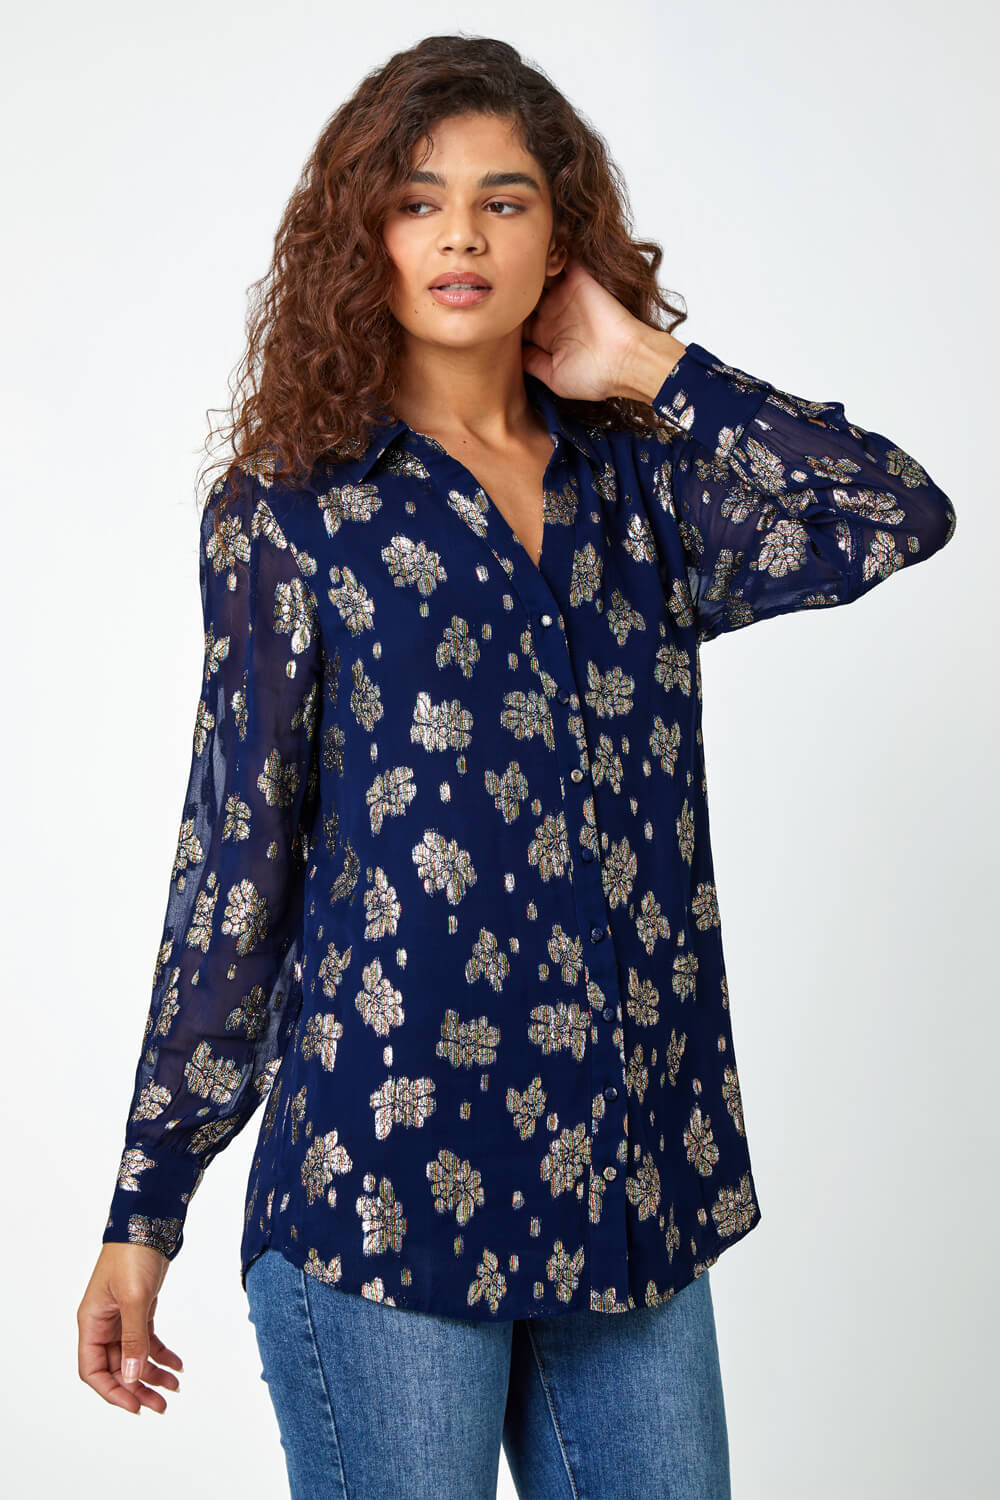 Midnight Blue Metallic Floral Print Blouse, Image 2 of 5